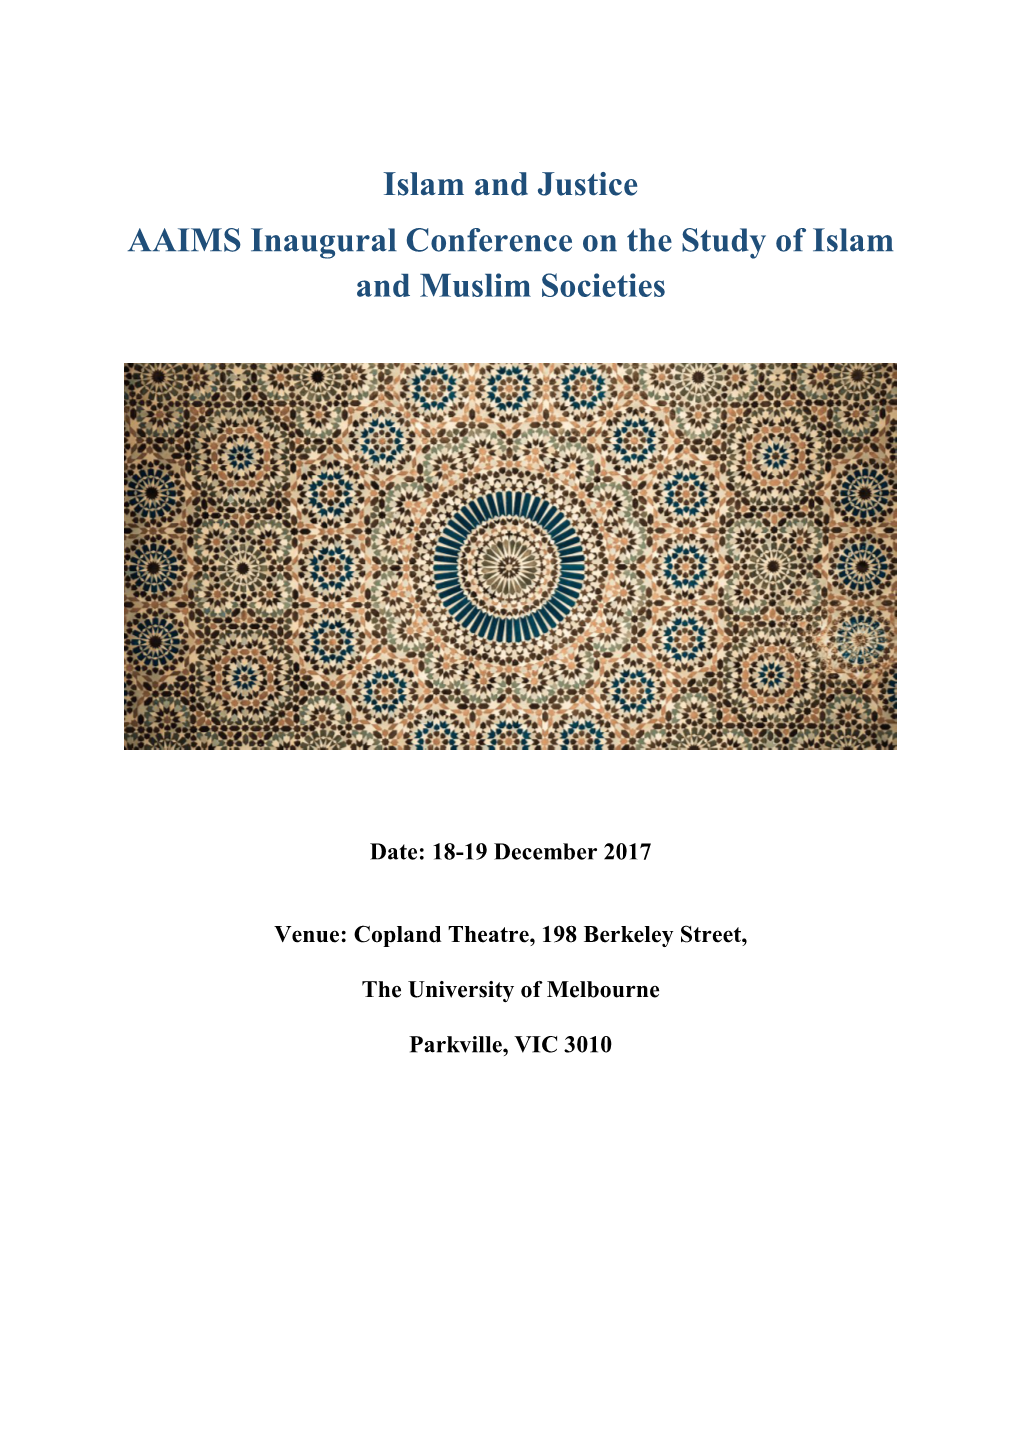 Islam and Justice AAIMS Inaugural Conference on the Study of Islam and Muslim Societies